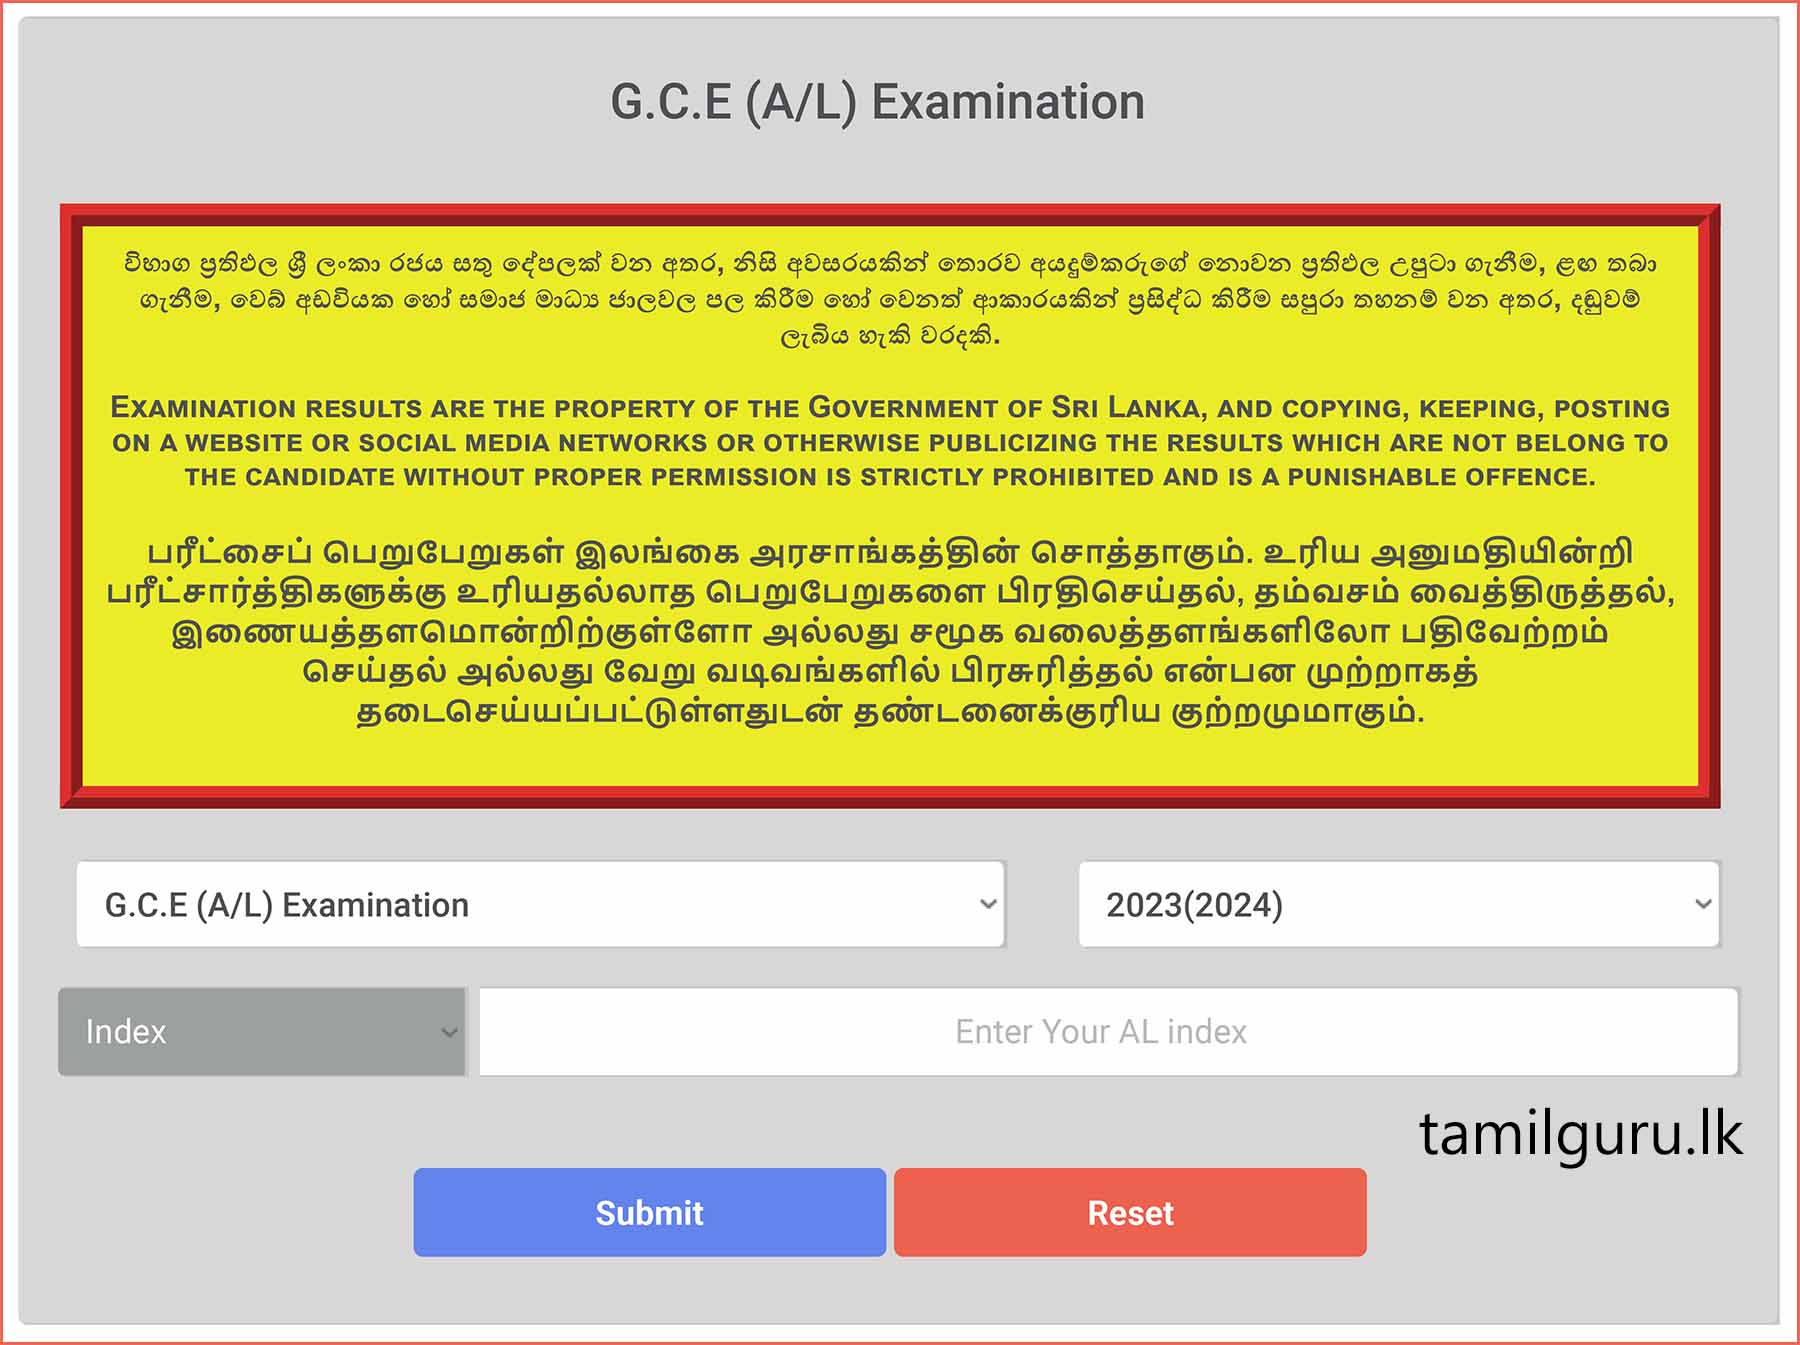 G.C.E. A/L Exam Results 2023 (2024) - Released Online (doenets.lk)